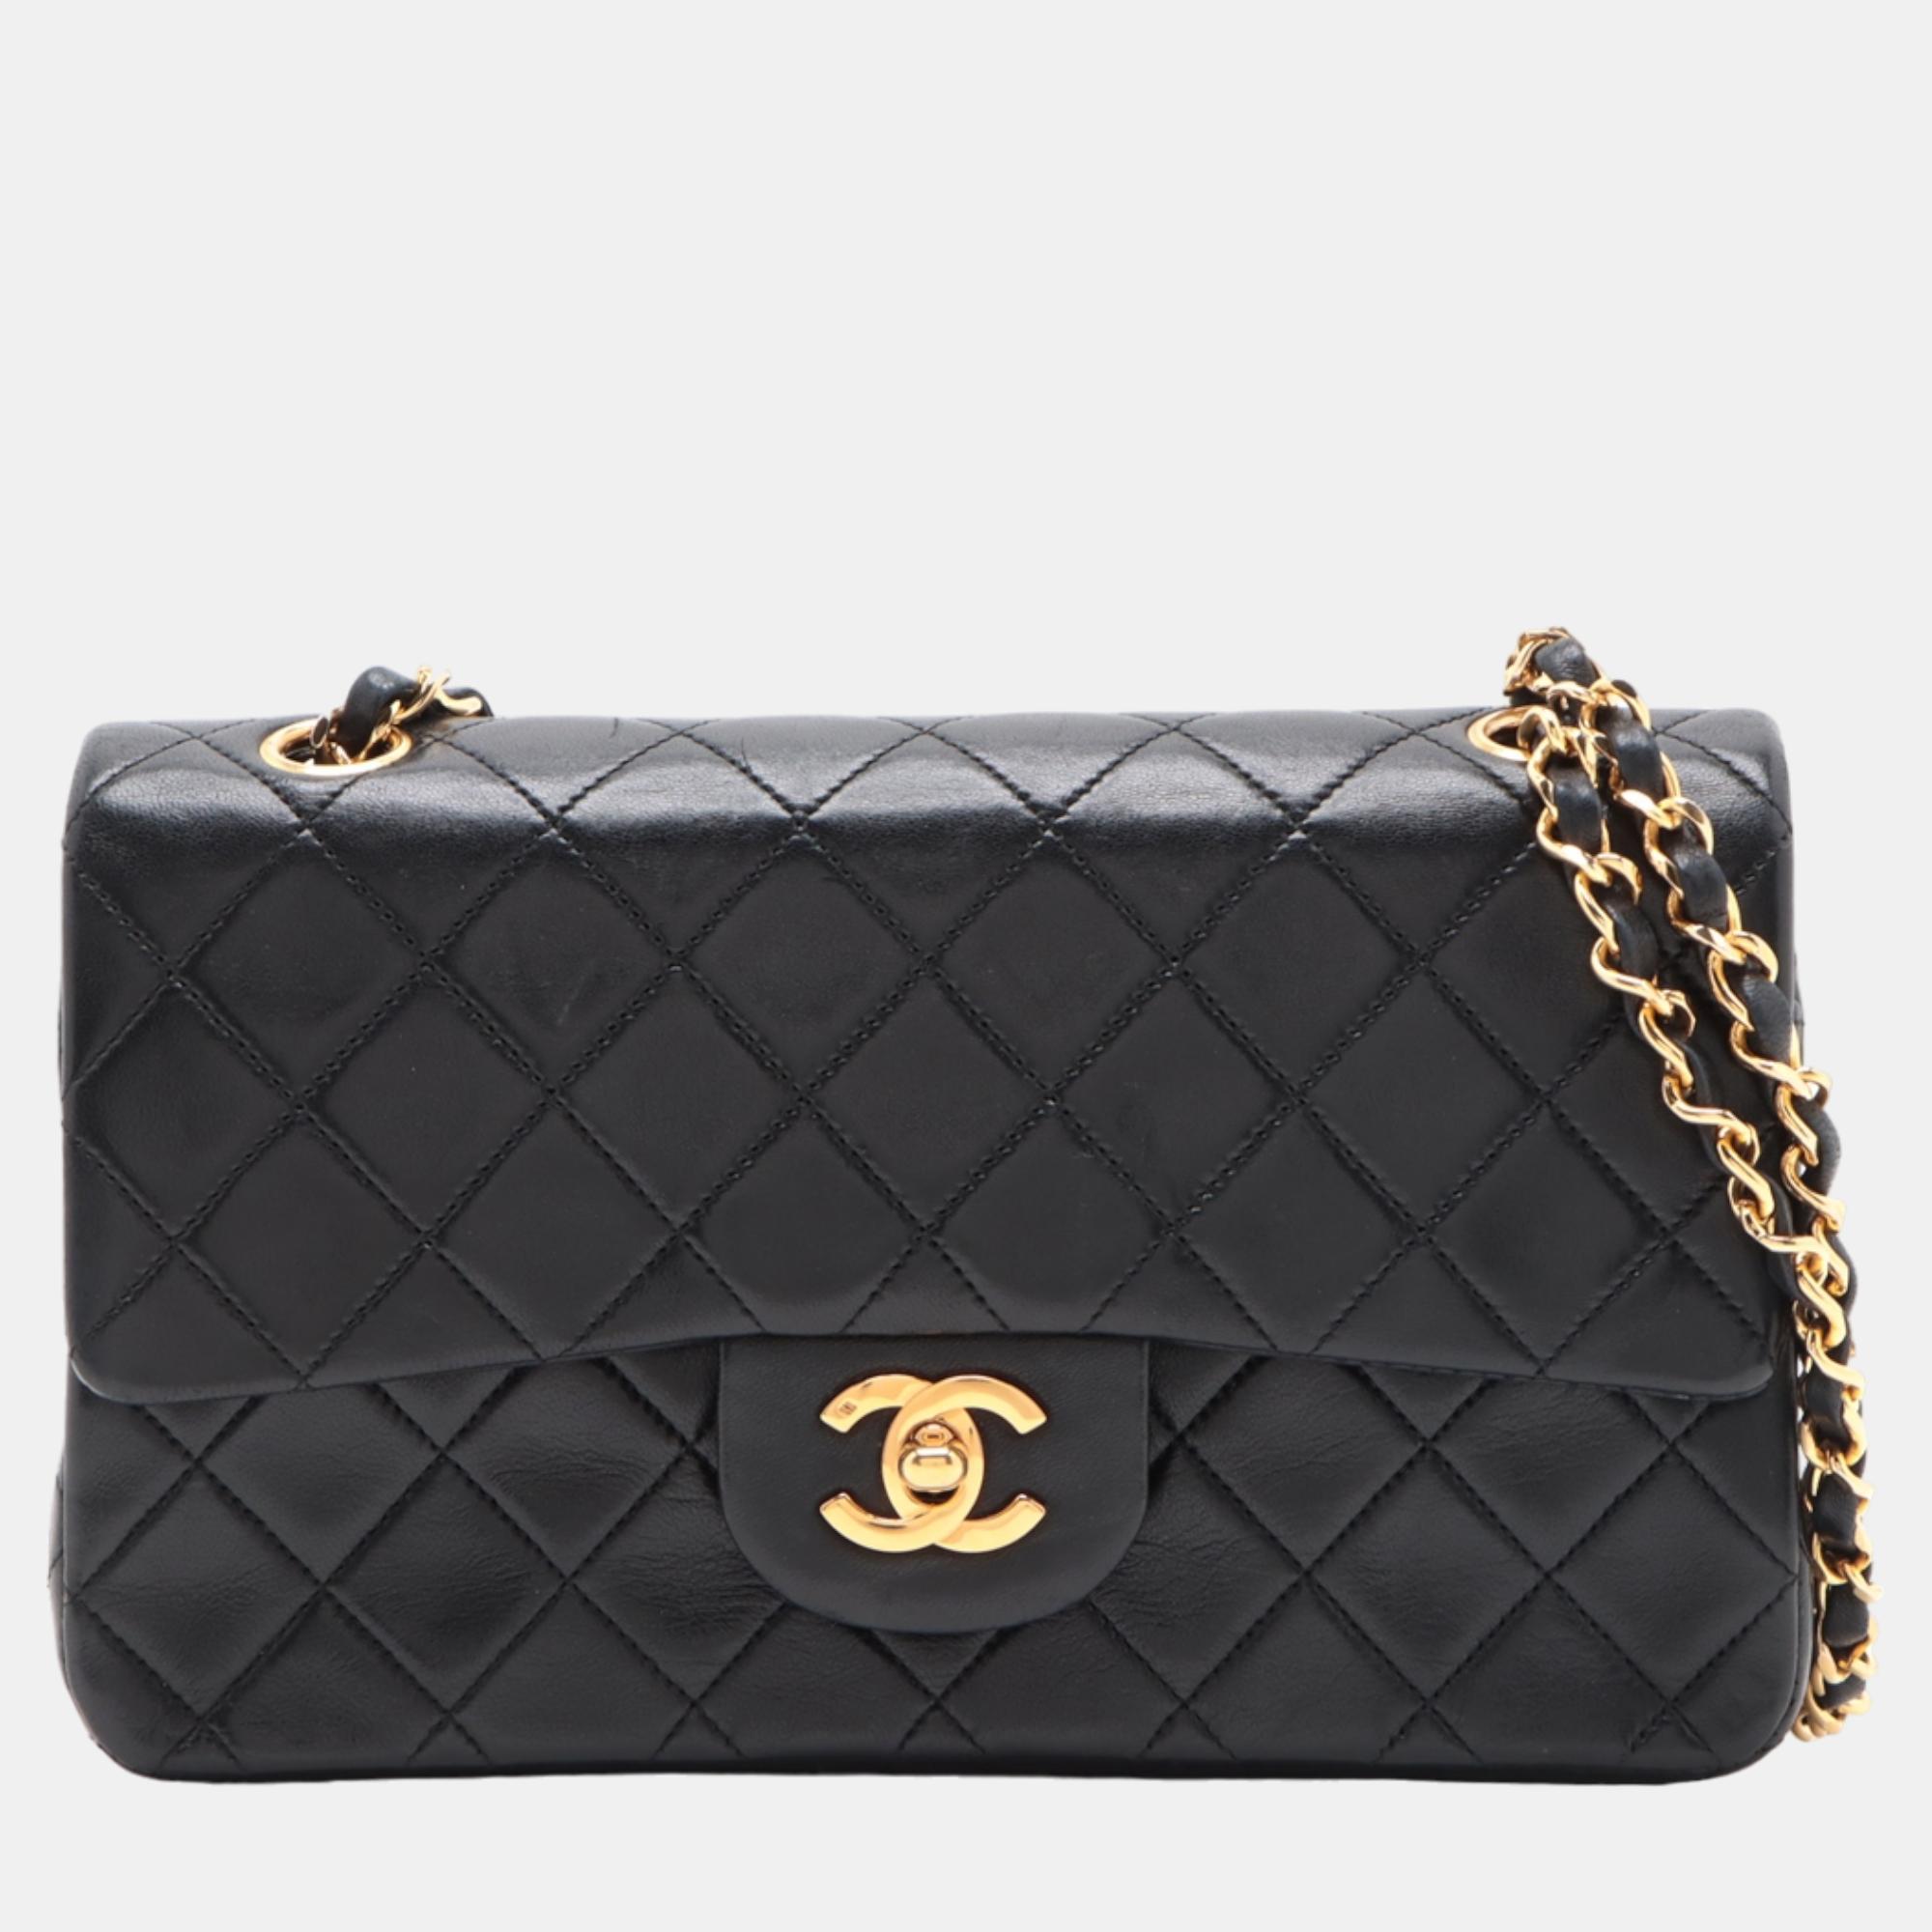 Chanel black lambskin leather small classic double flap shoulder bags